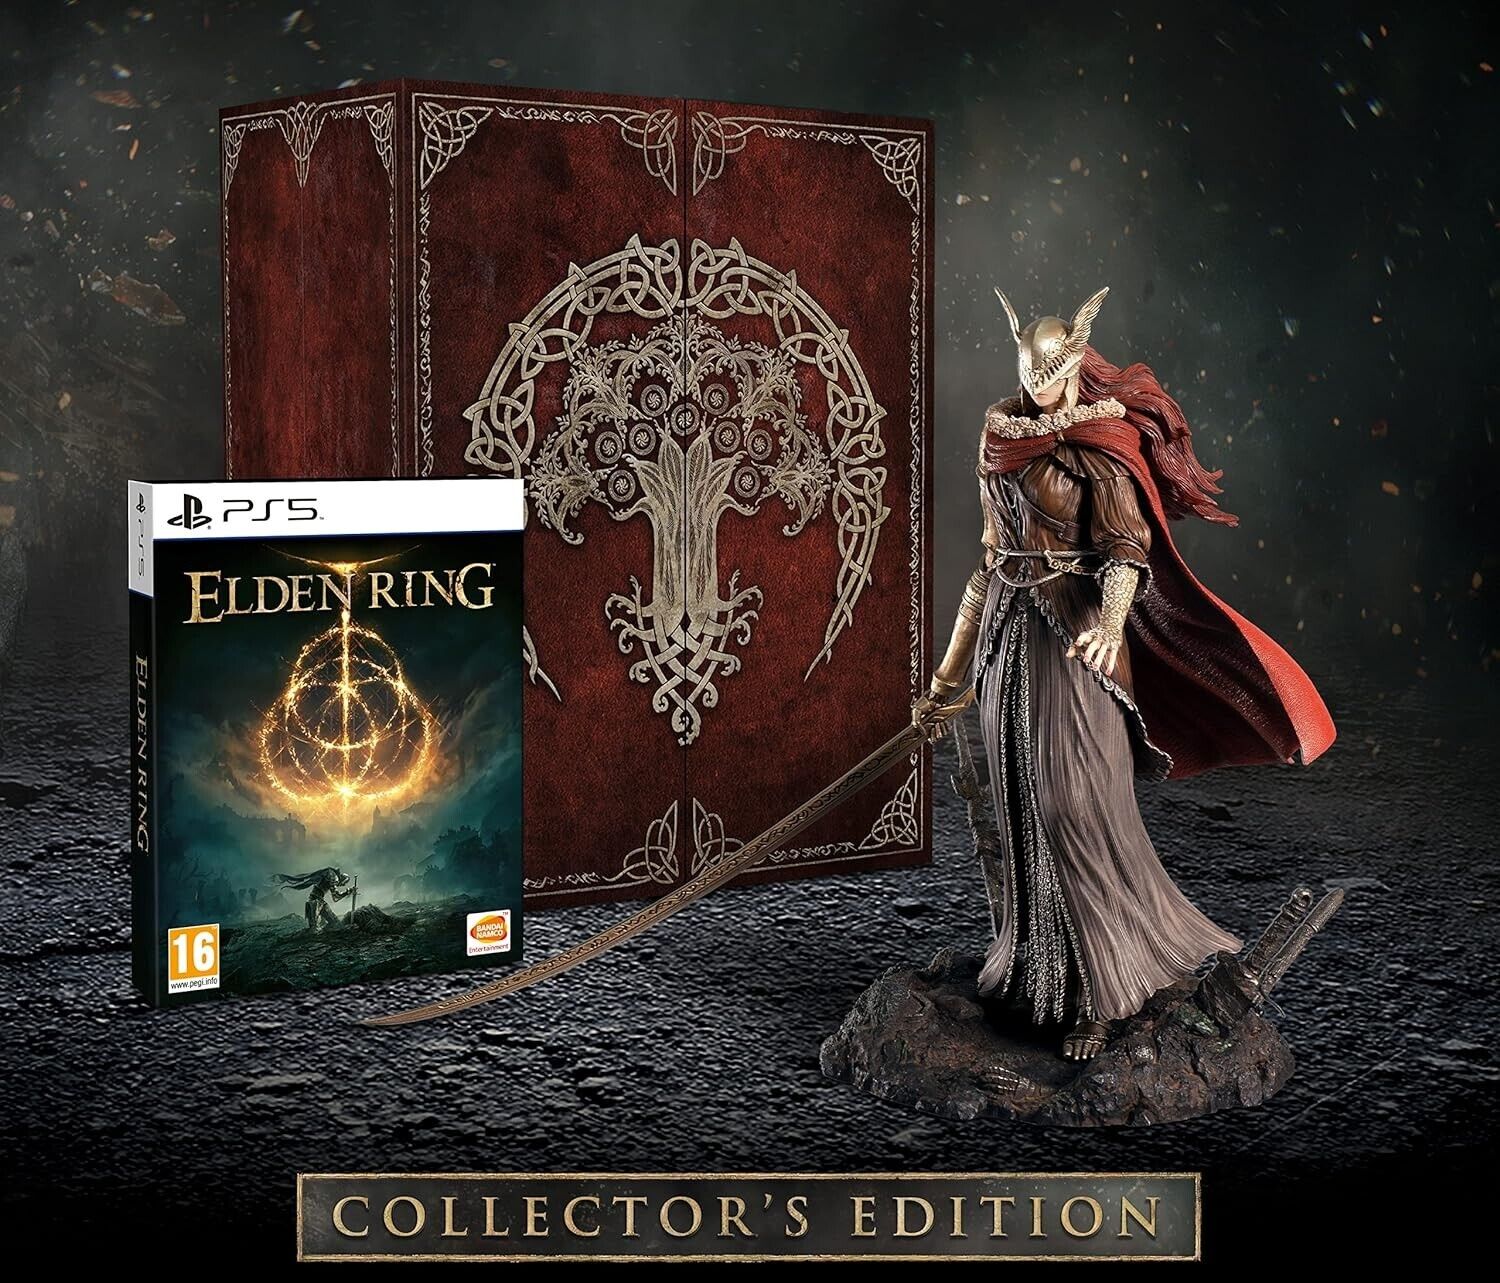 ELDEN RING Collector's Edition - PlayStation 5 - Factory Sealed N-Mint Condition